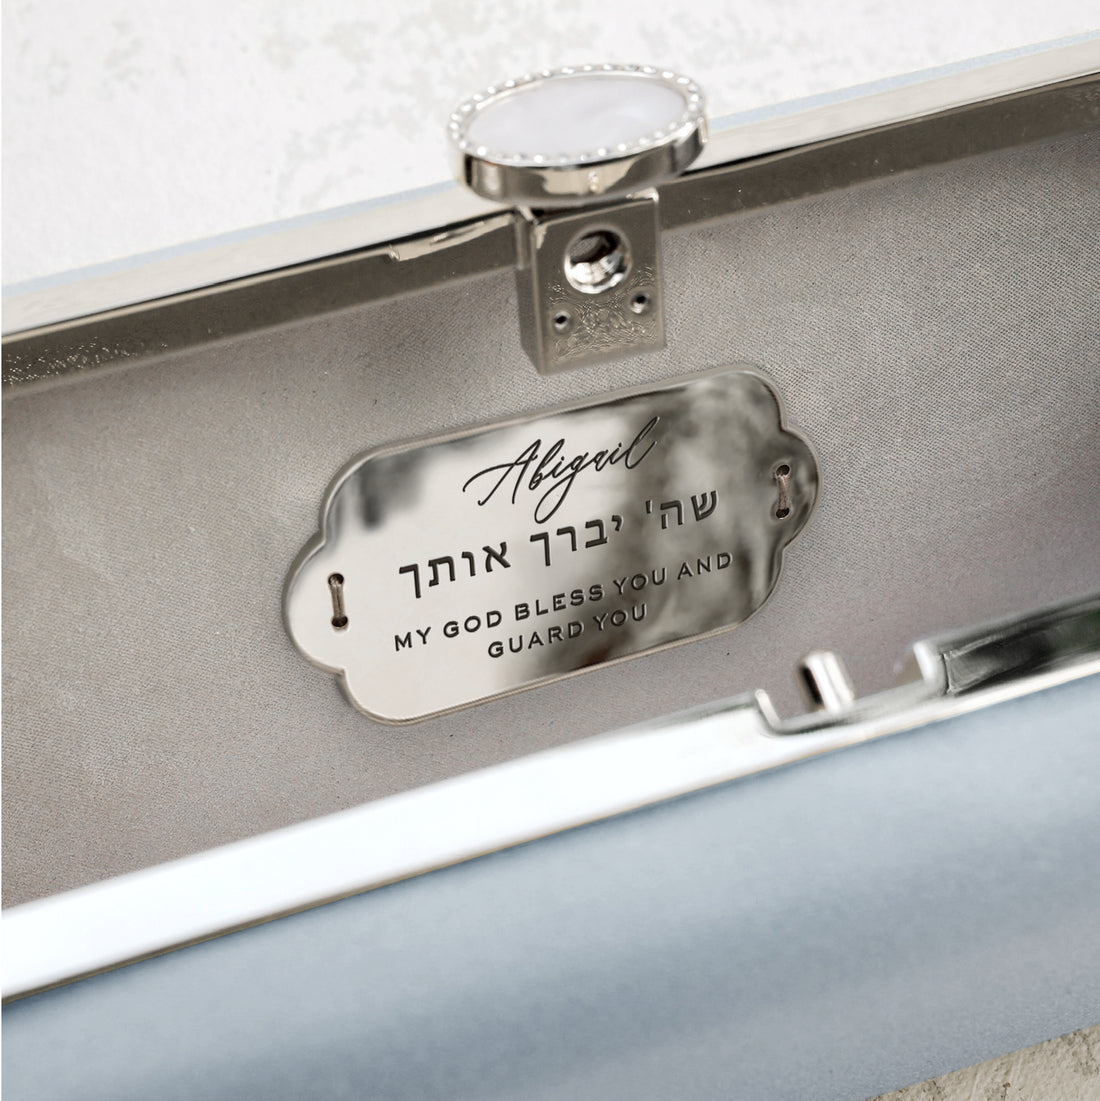 A personalized gift, the Bat Mitzvah Personalized Bella Clutch Petite from The Bella Rosa Collection, adorned with a Hebrew name on a blue box.